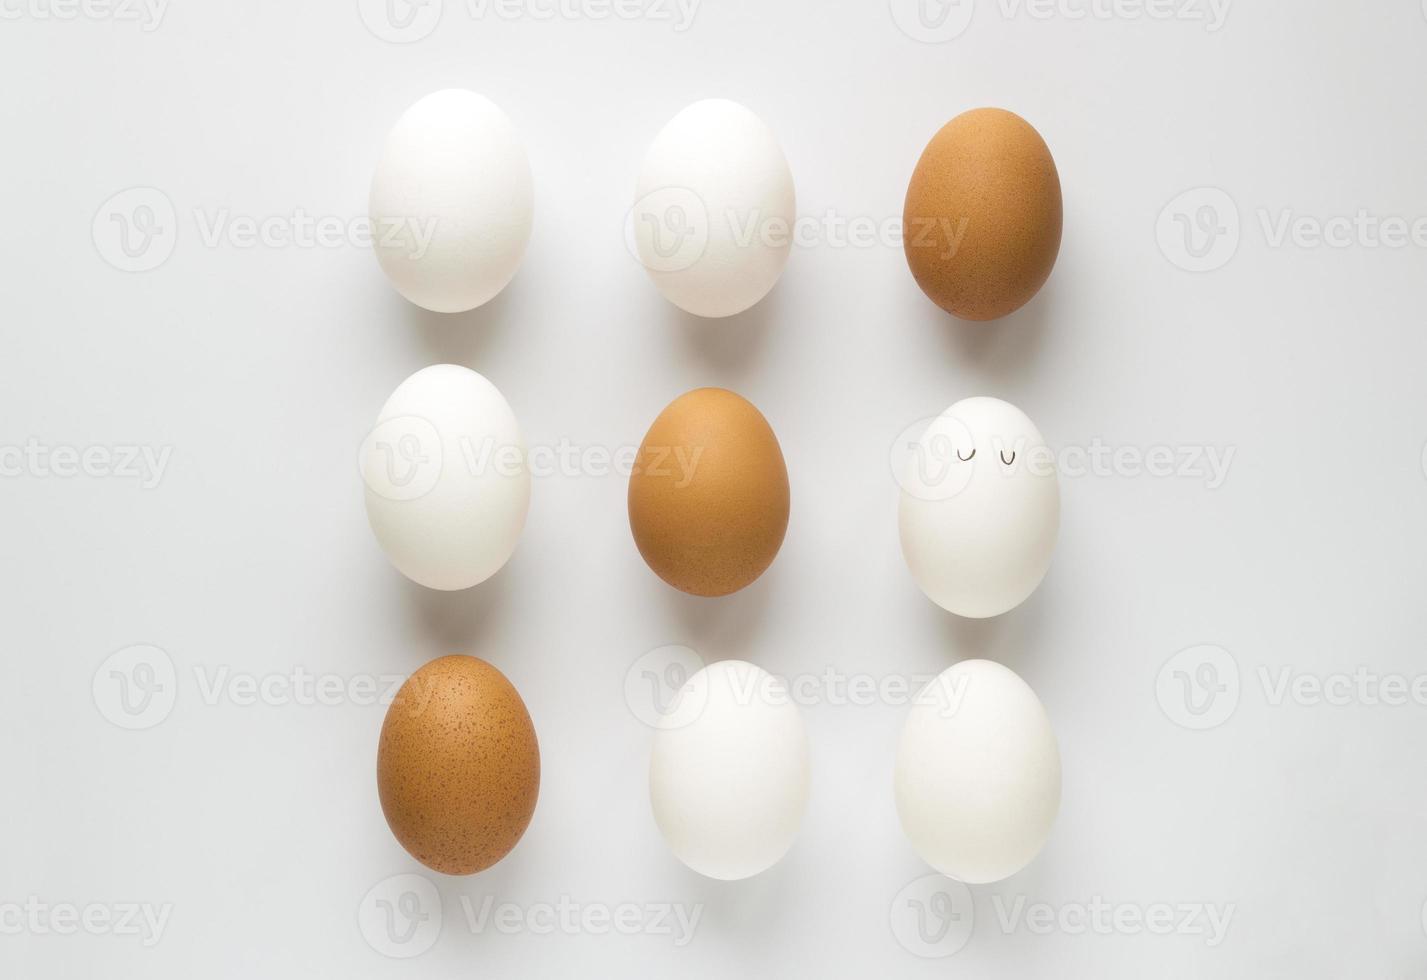 Set of fresh chicken egg in container on white paper background. Concept for Easter with copy space. Creative layout made of white and brown eggs. Top view photo